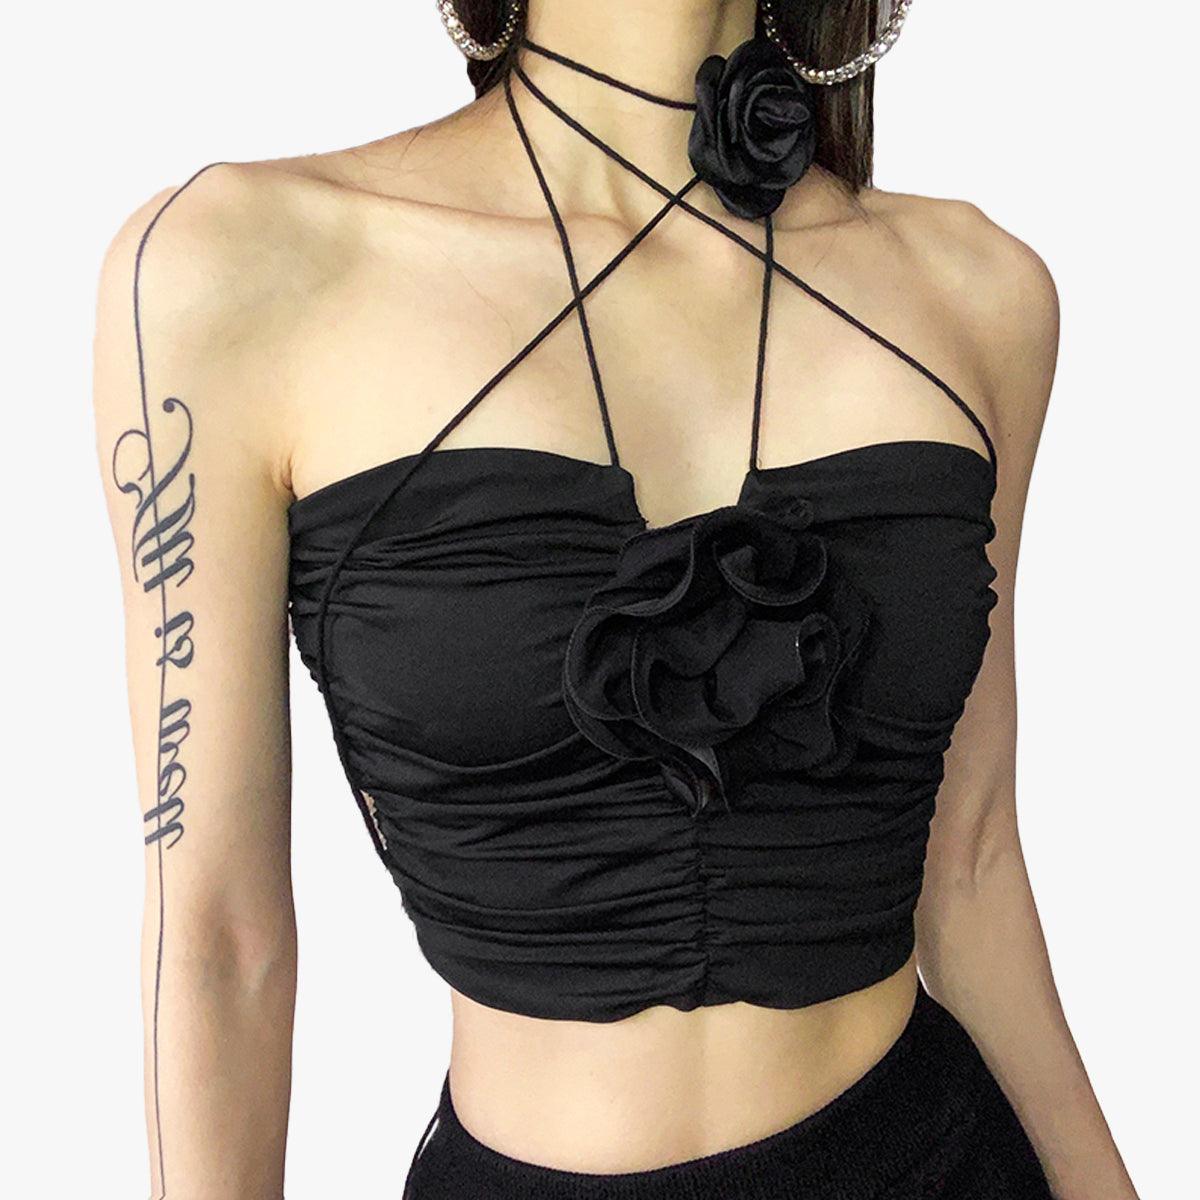 Deadly Black Roses Tube Crop Top - Aesthetic Clothes Shop